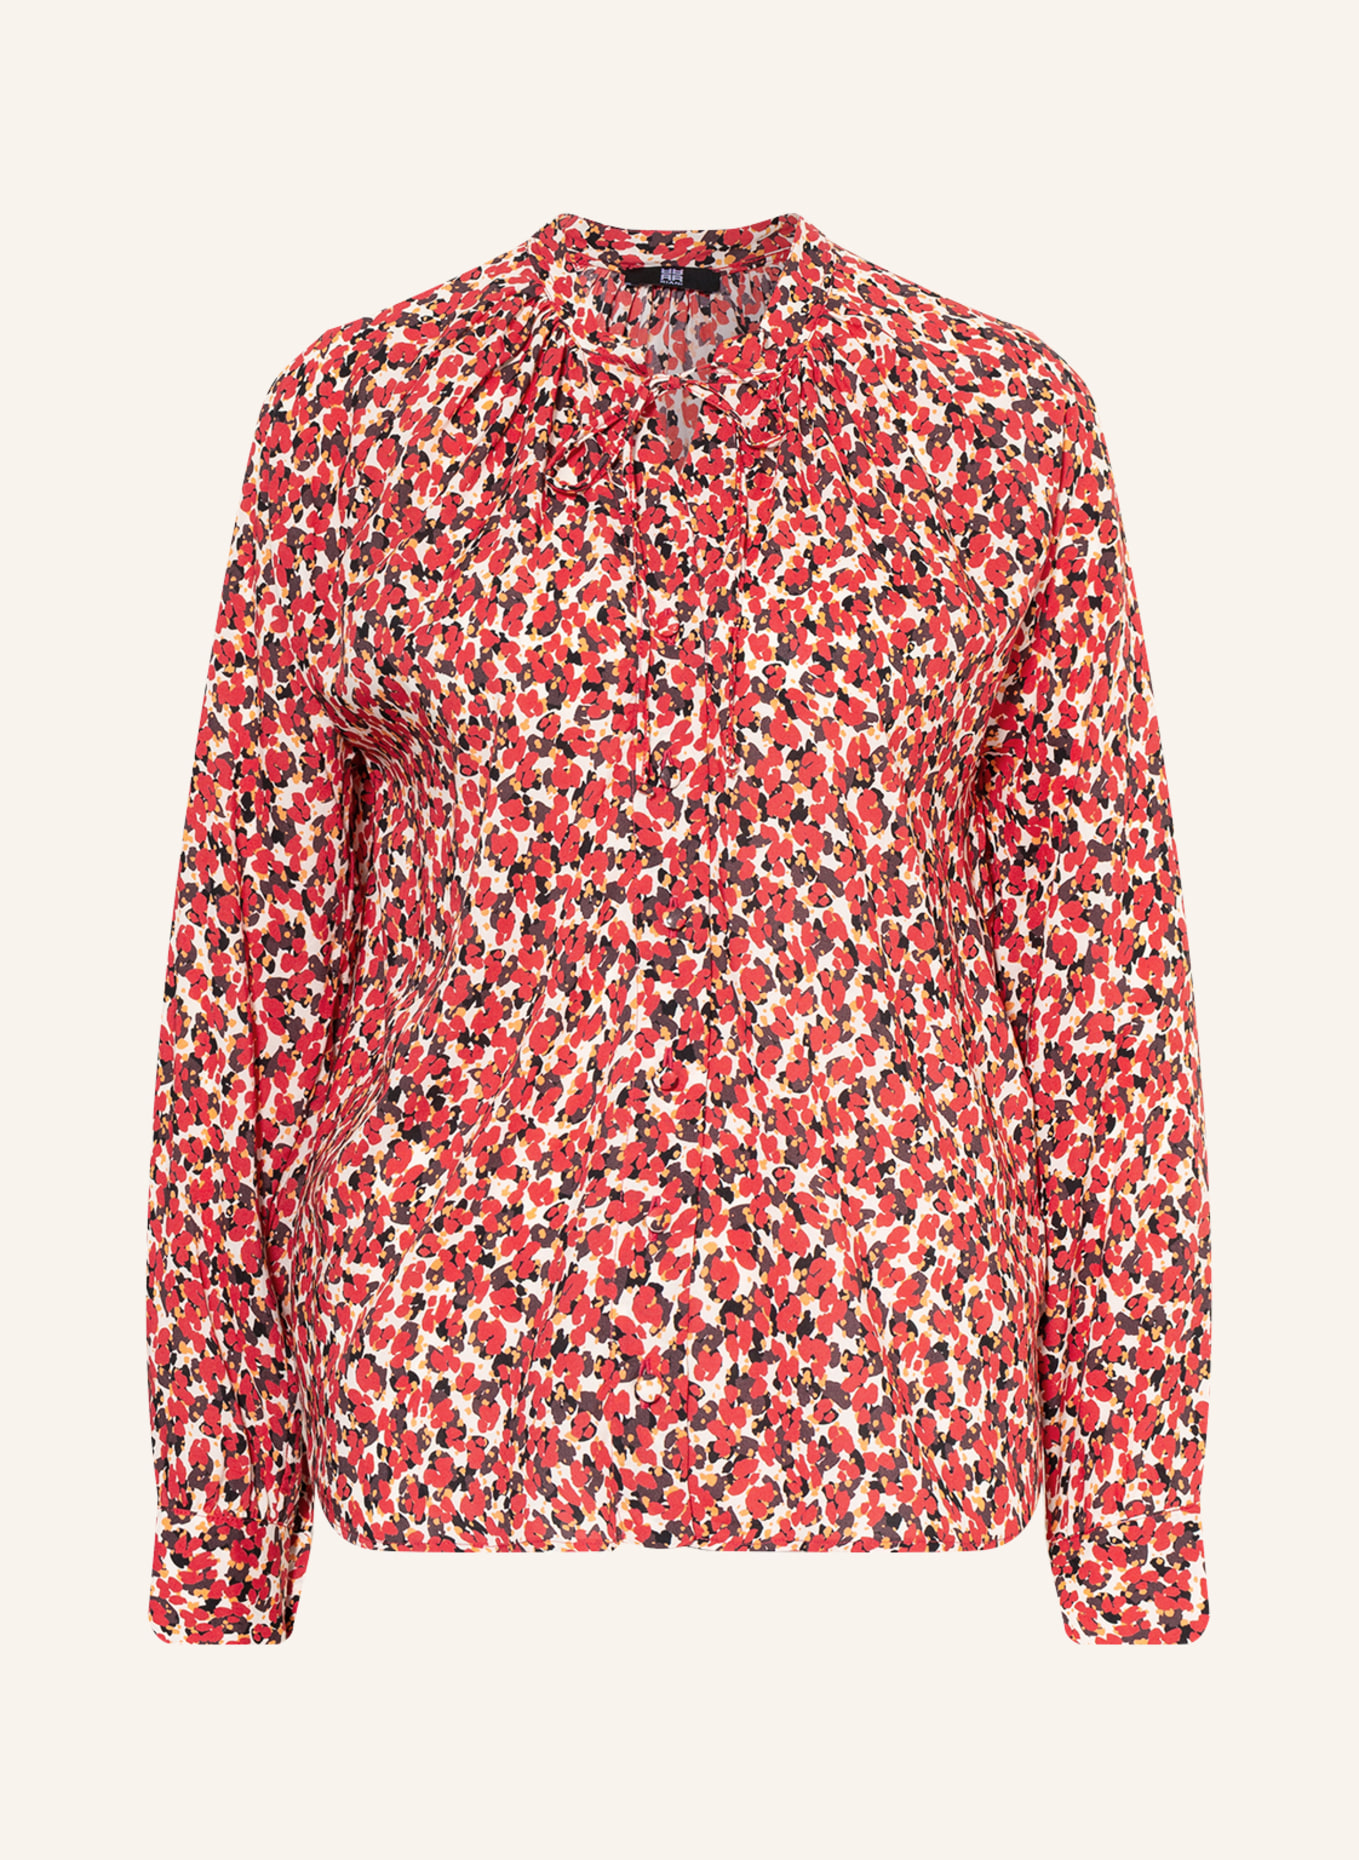 RIANI Shirt blouse, Color: RED/ CREAM/ DARK BROWN (Image 1)